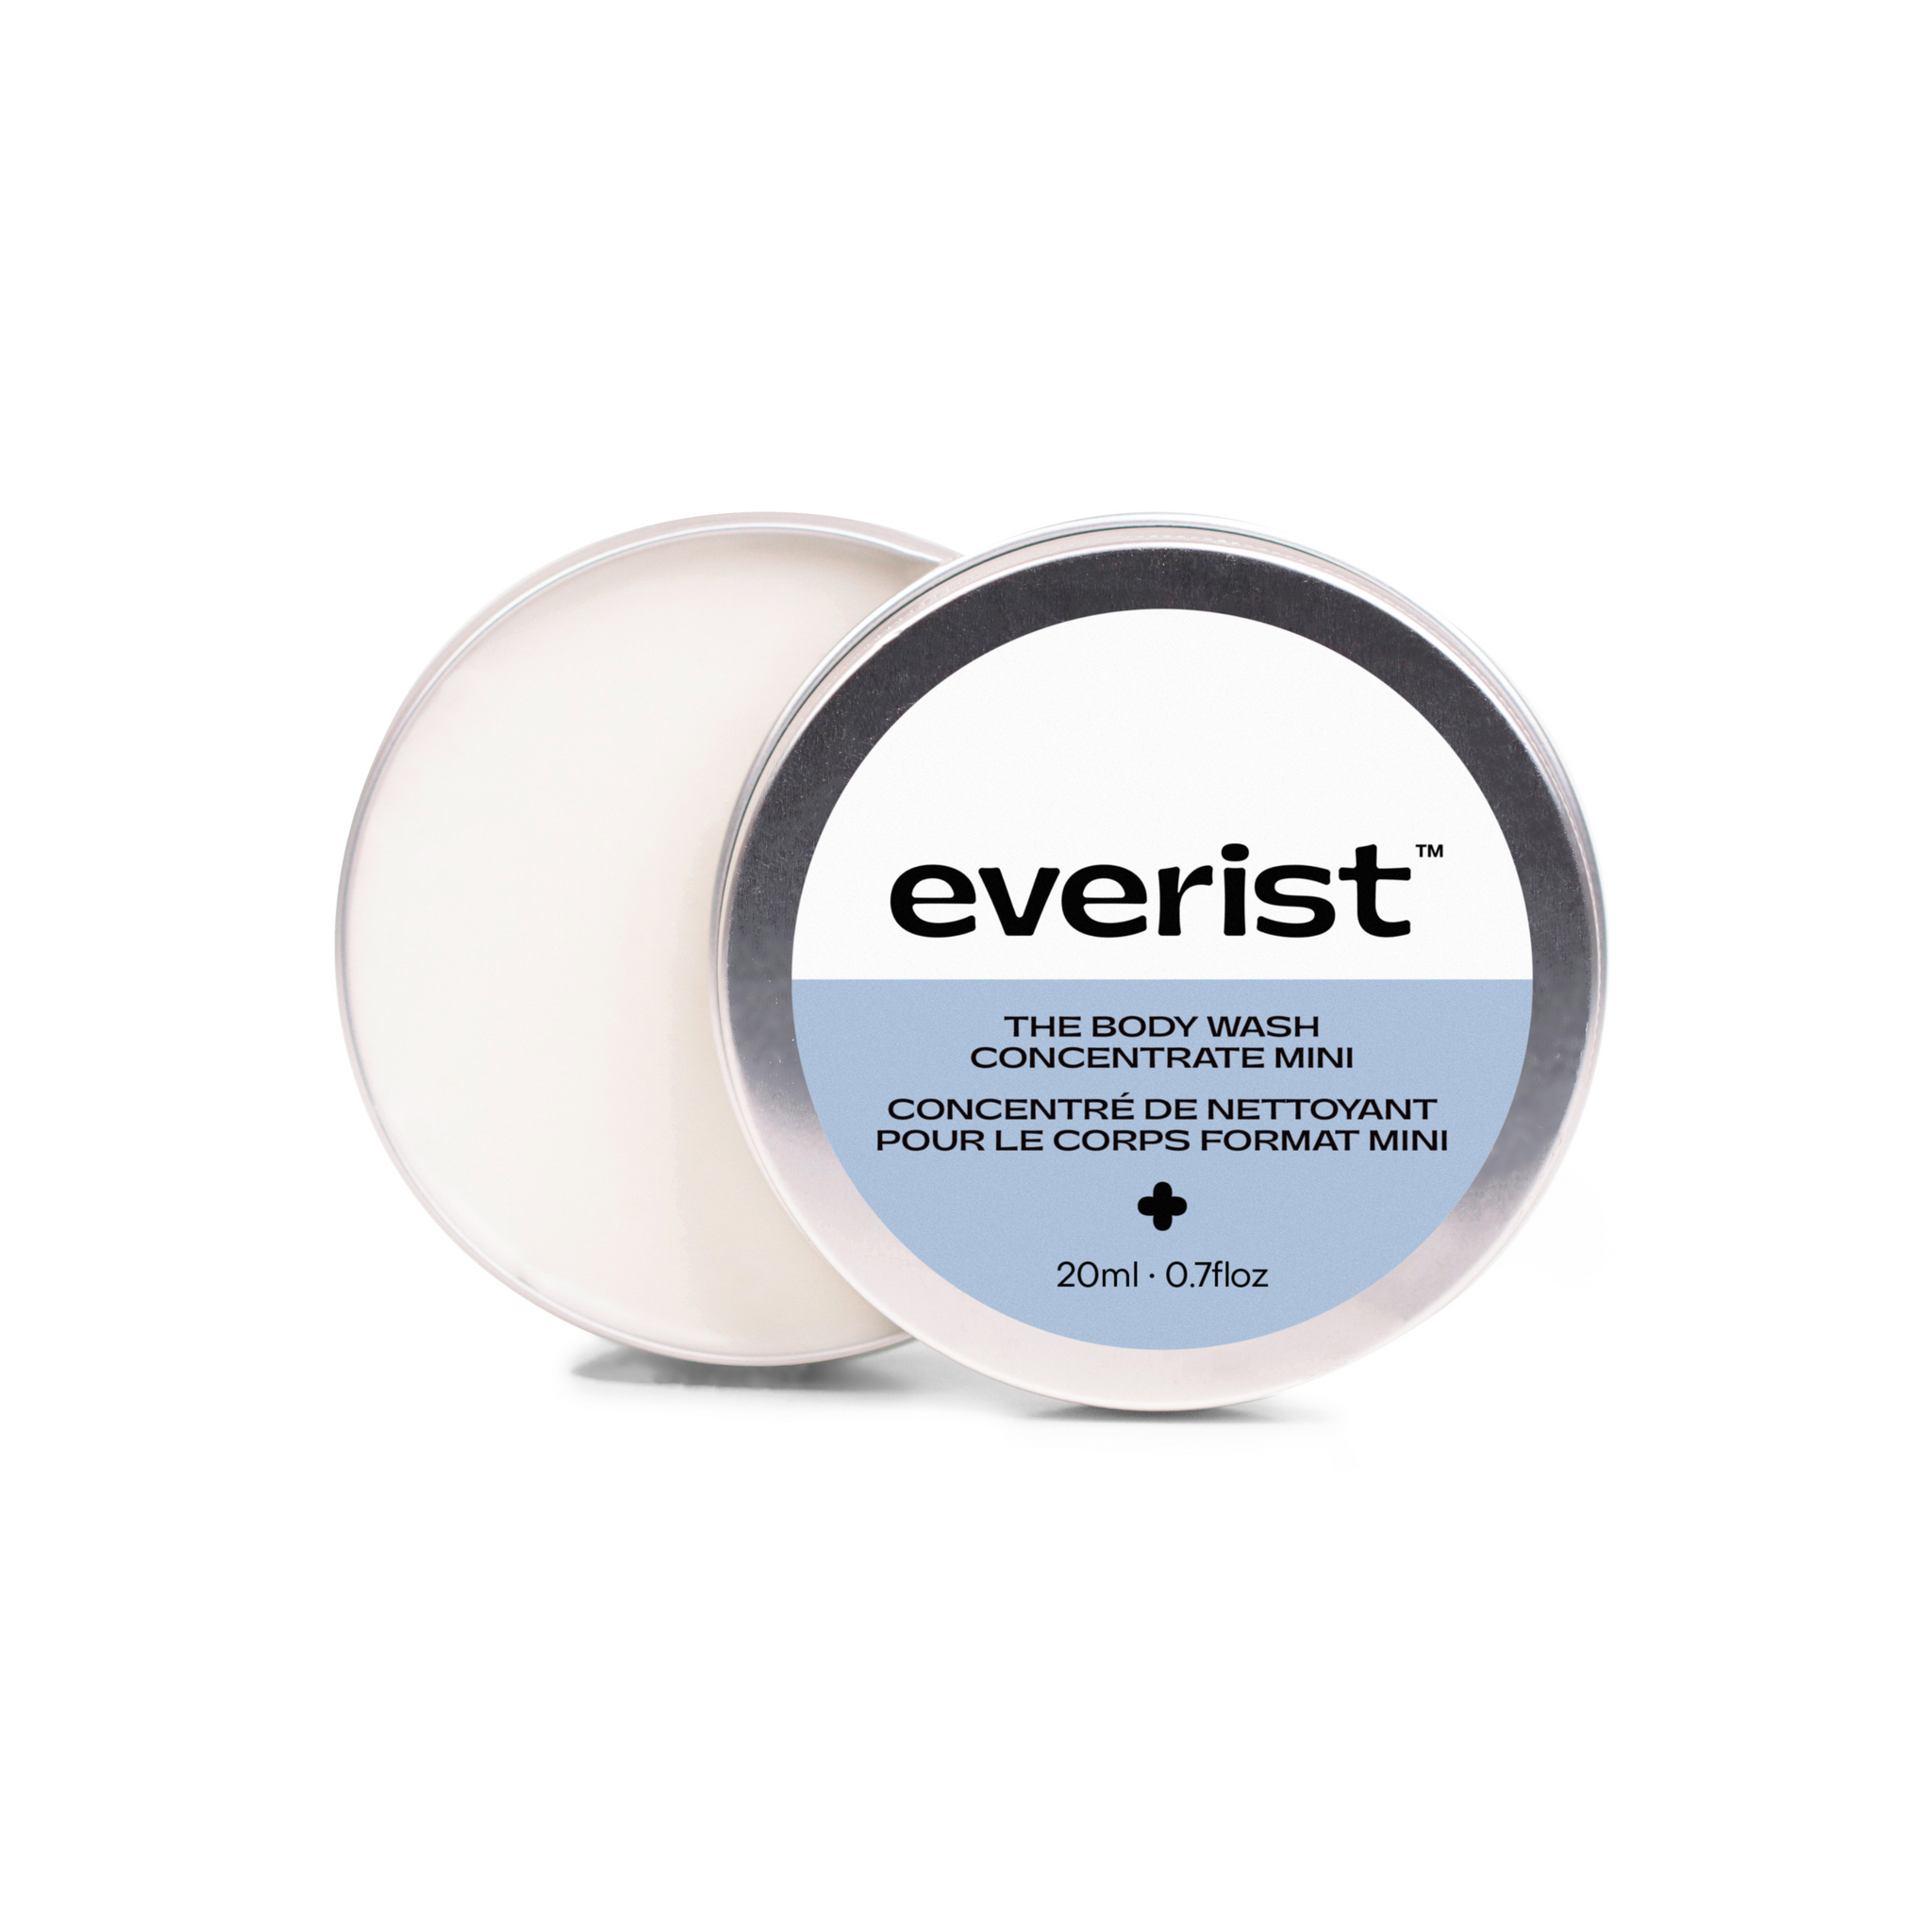 Everist - The Body Wash Concentrate - travel tin